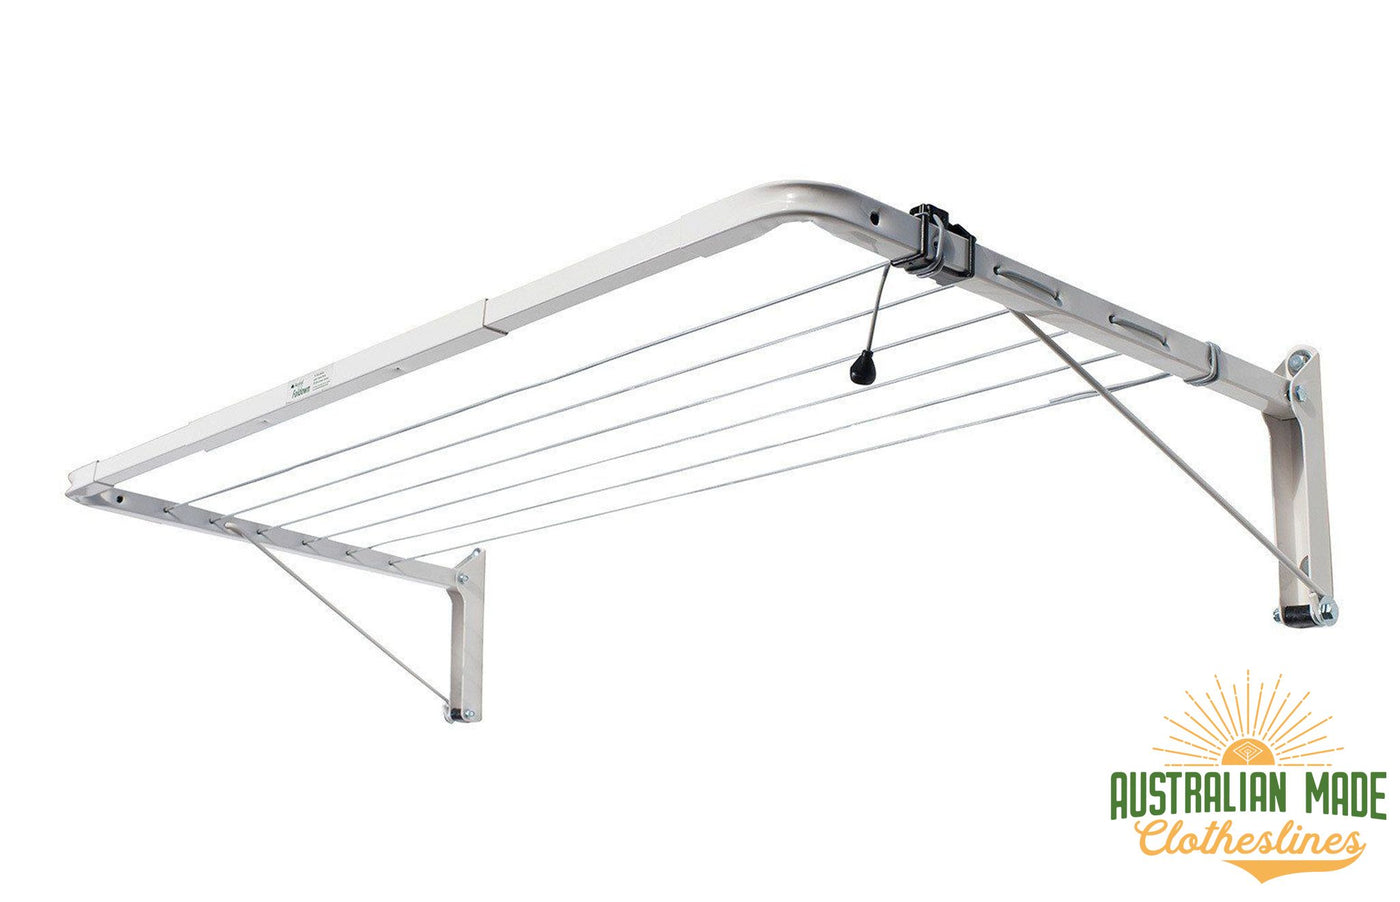 Austral Indoor Outdoor Clothesline - Colour White - Australian Made Clotheslines